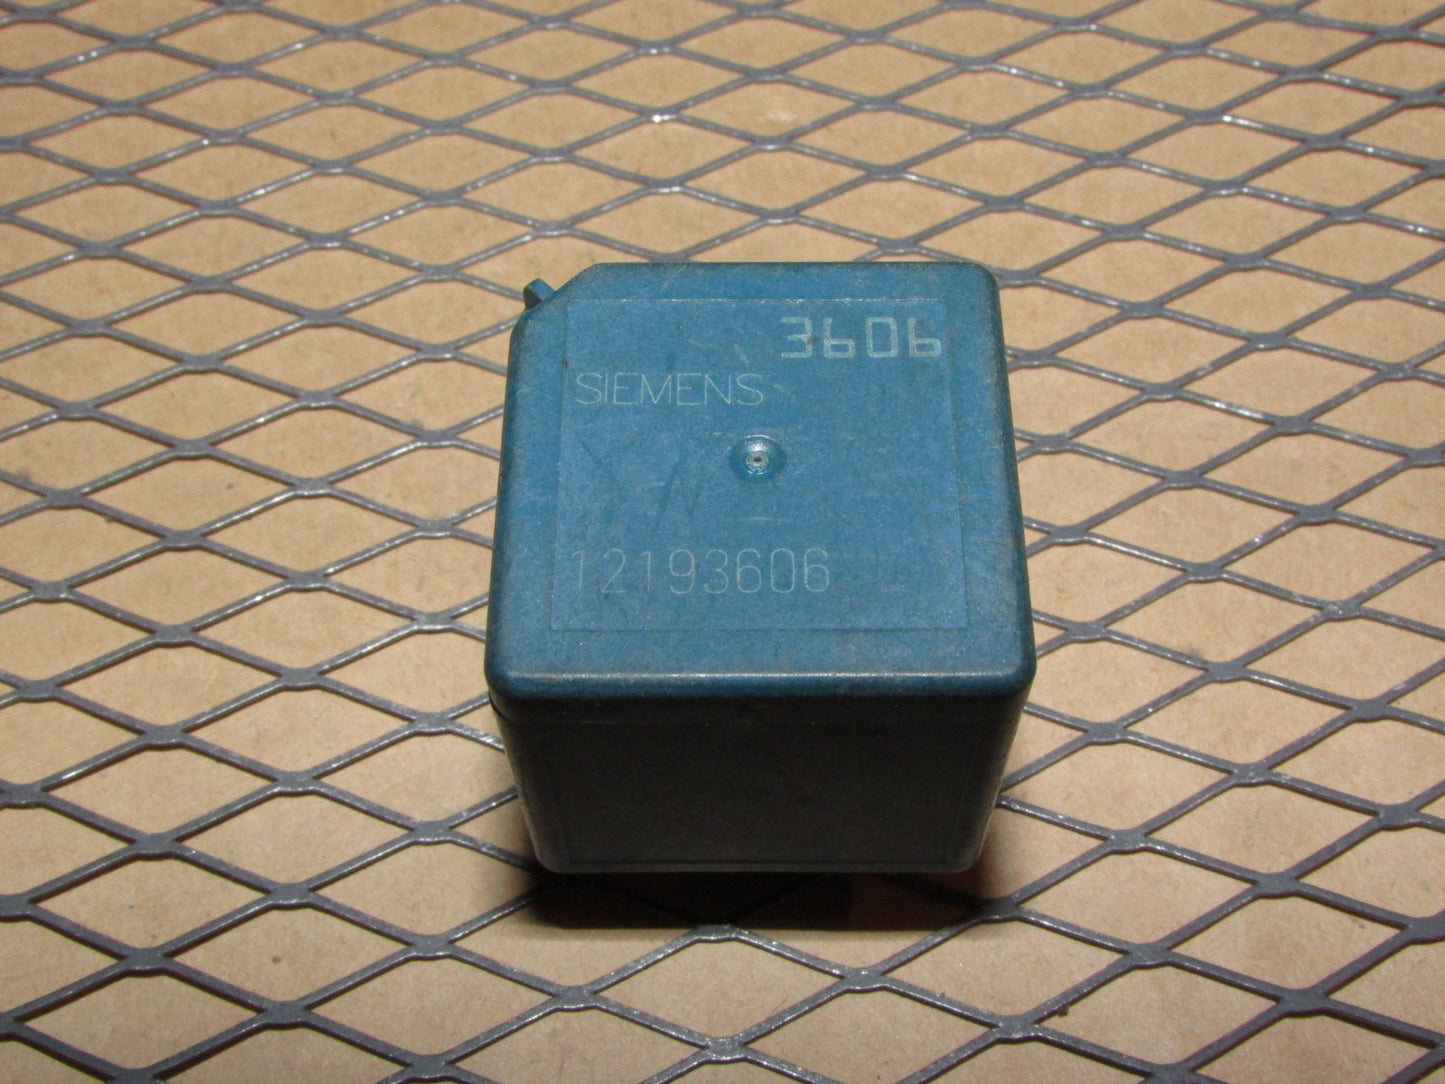 GM Relay 3606 / 12193606